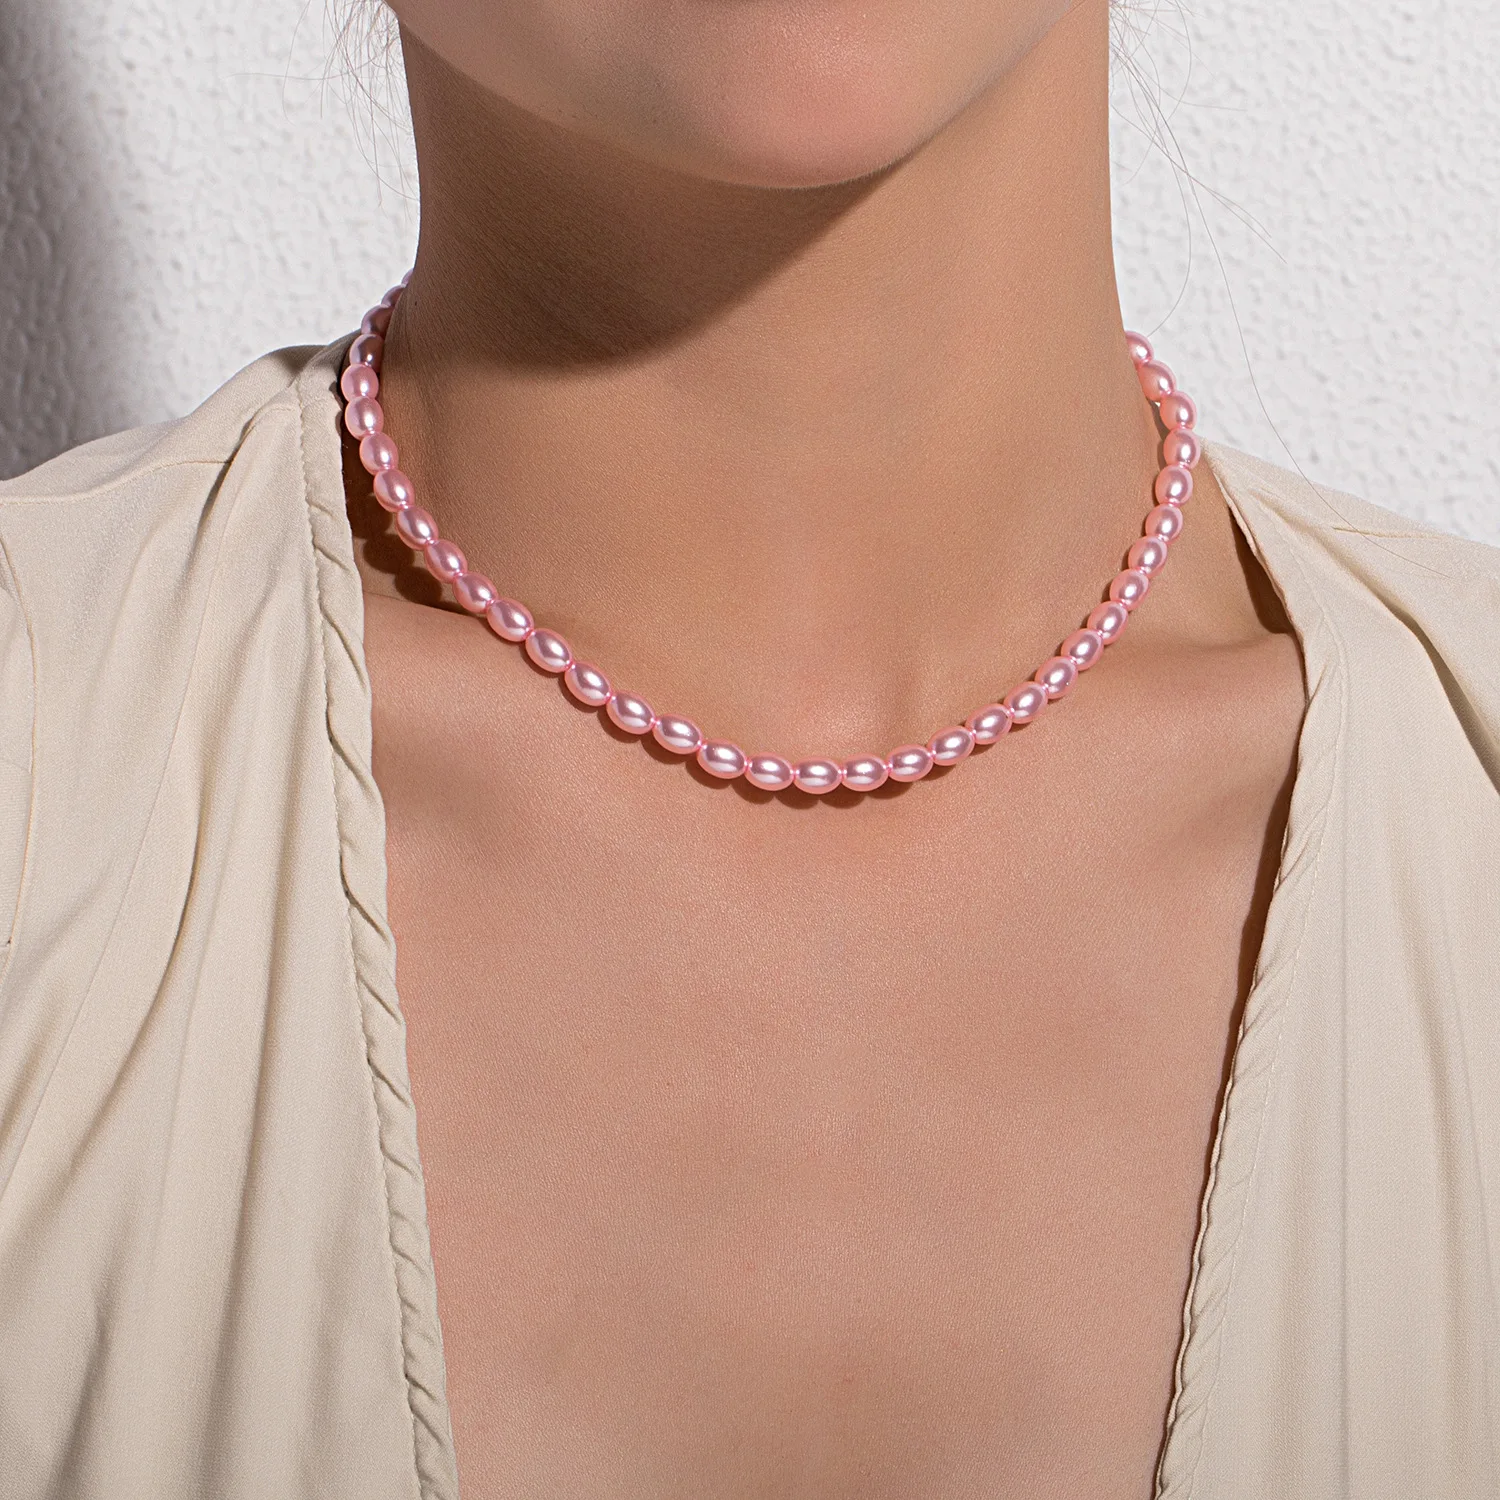 

Colorful Imitation Pearl Necklace Choker Collarbone Chain Blue White Pink Pearls Hand-Woven Ship Rudder Clasp Ladies Jewelry